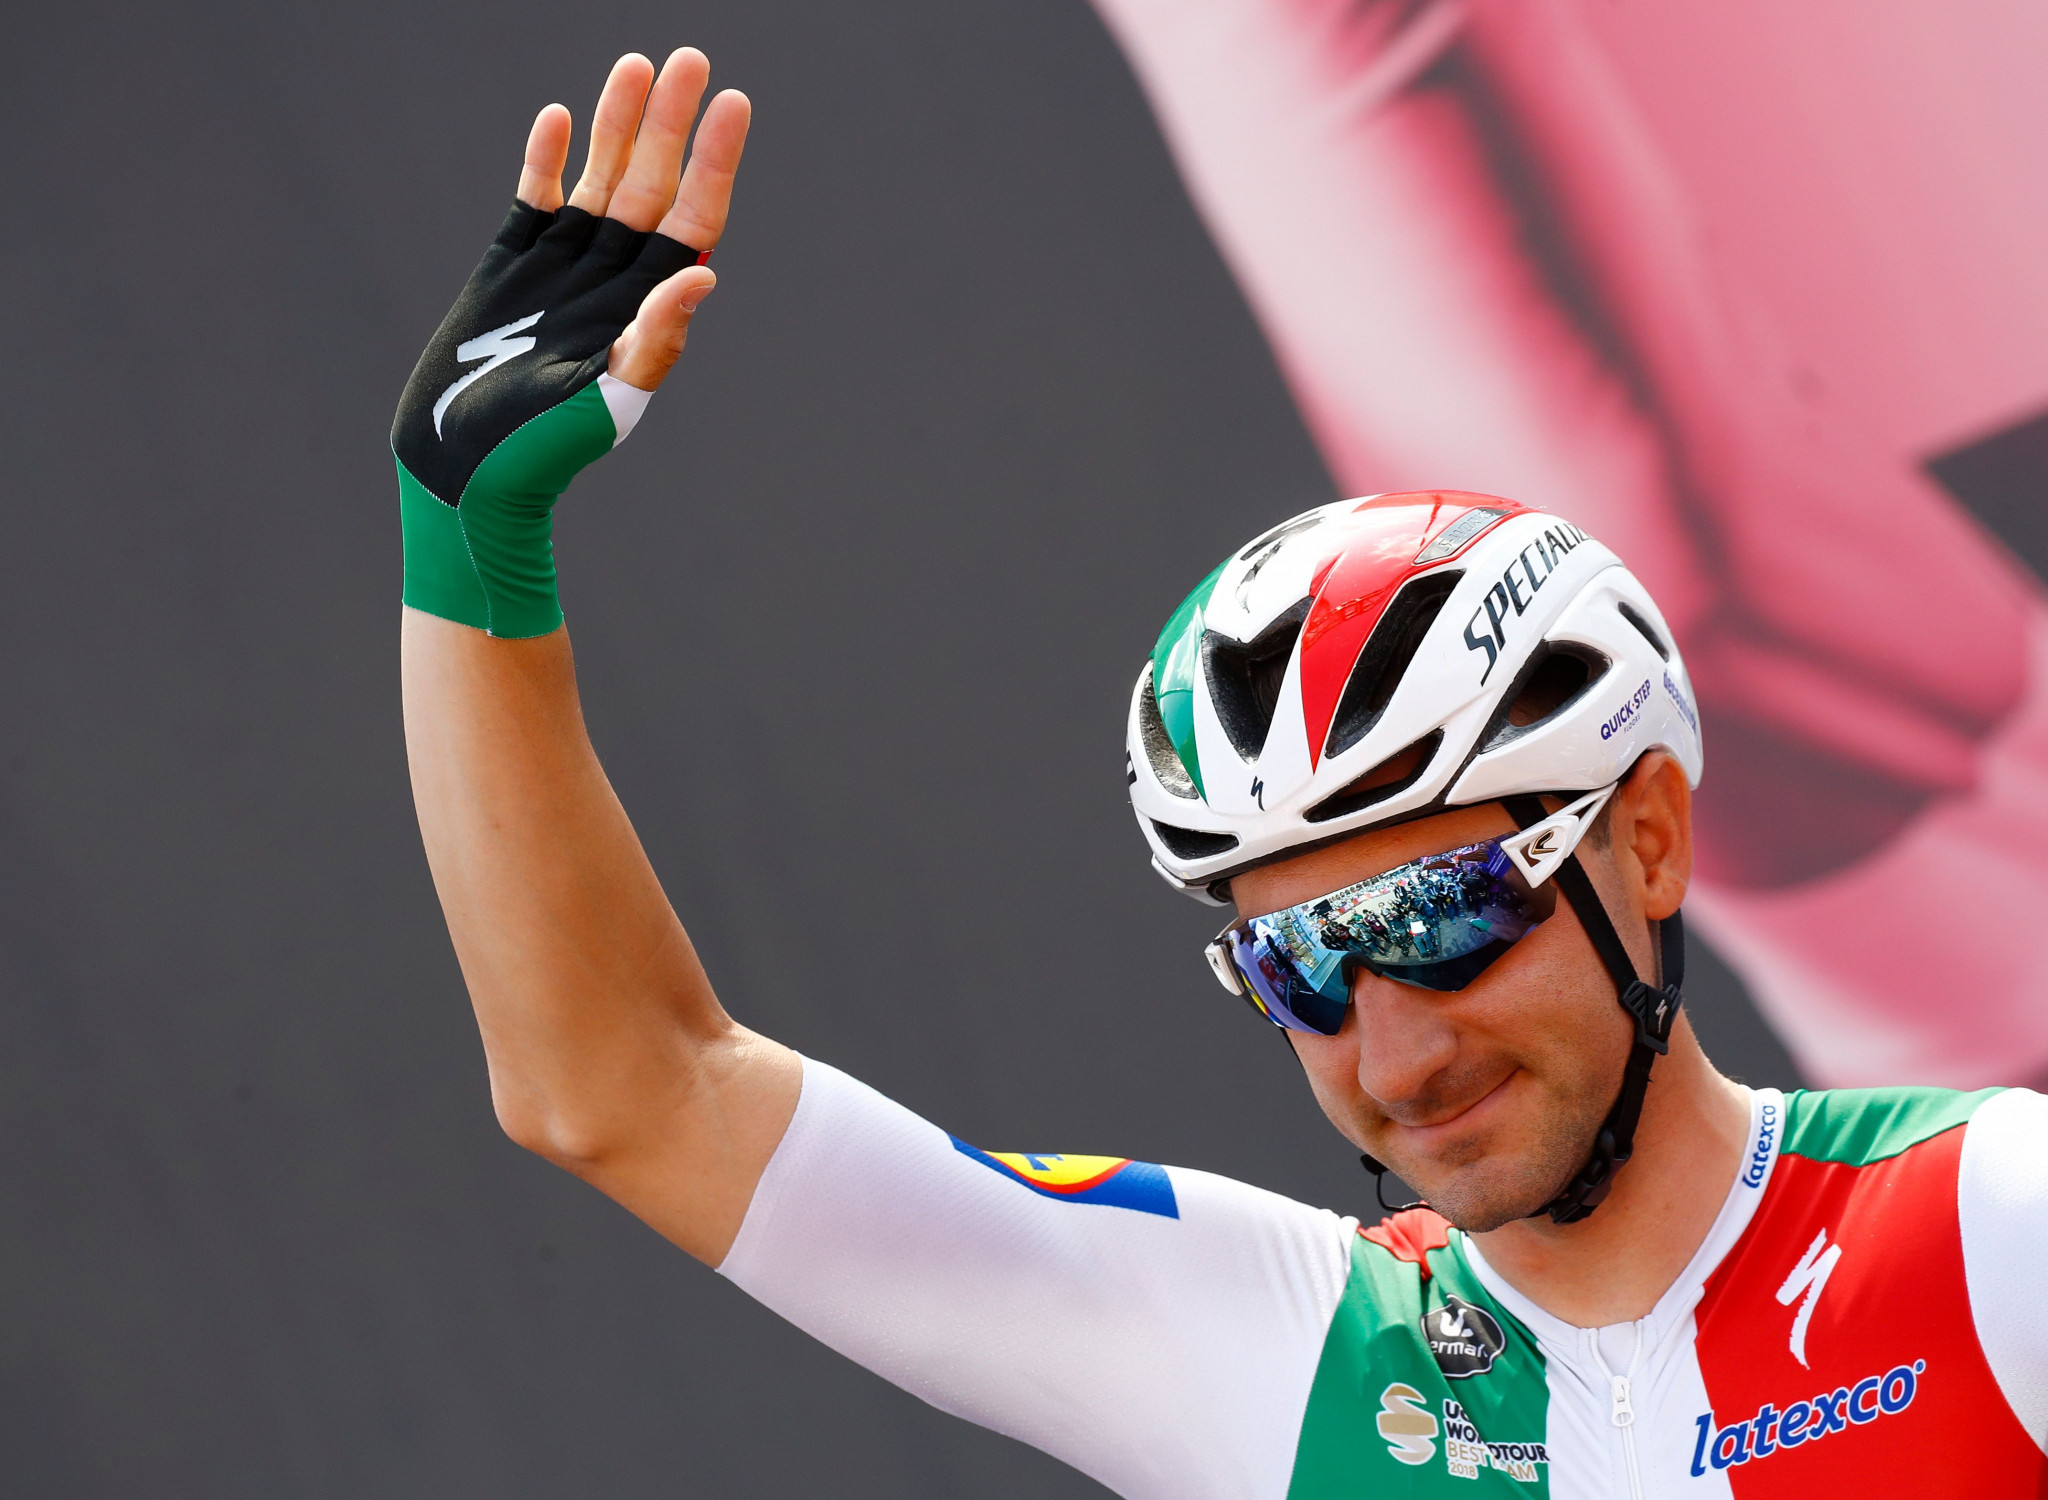 Viviani claims Tour de Suisse yellow jersey as Team Ineos rider Thomas crashes out